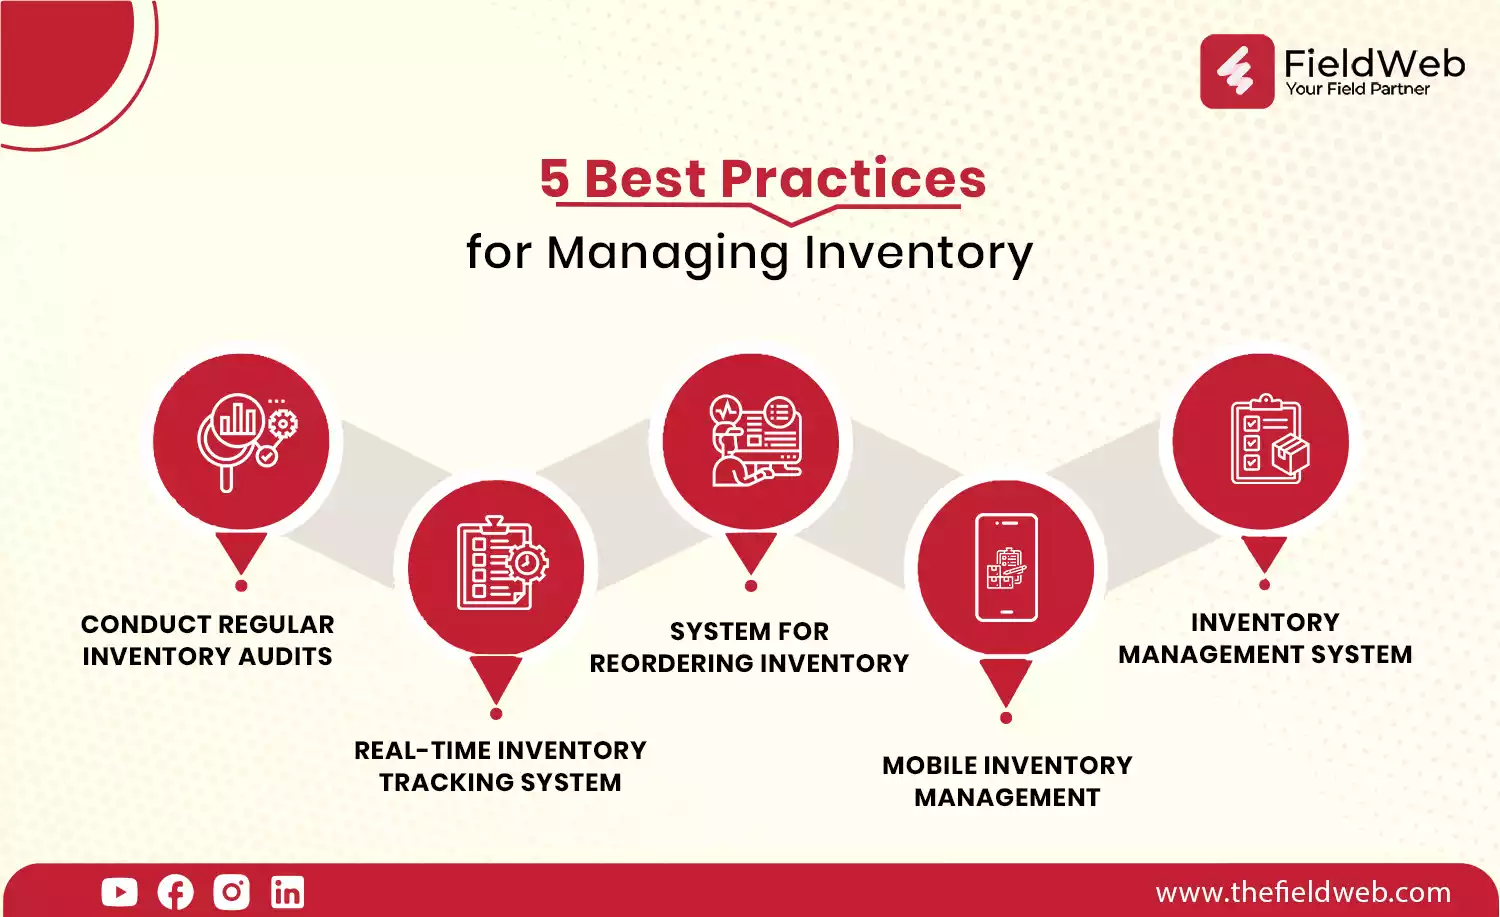 image is displaying 5 best practices for managing inventory in field service businesses